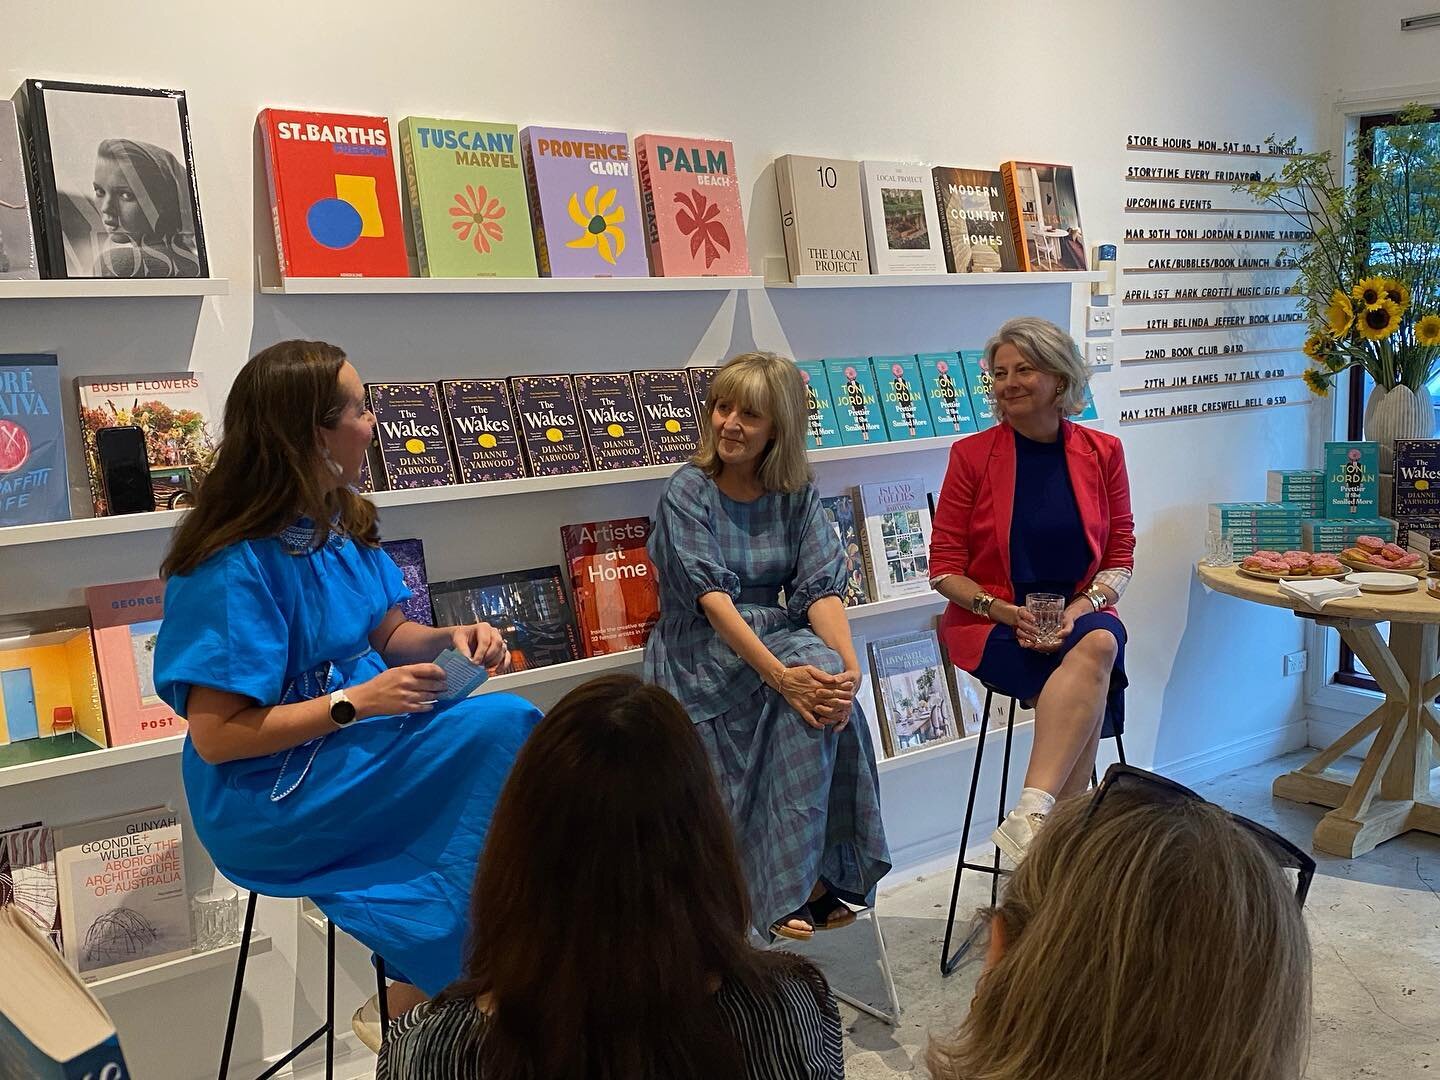 Last night Toni Jordan and I were interviewed by author Tori Haschka at the beautiful Wax Lyrical book shop in Berry. 

I&rsquo;m still pinching myself that I get to spend evenings chatting about writing with groups of warm book lovers! 

Thank you t